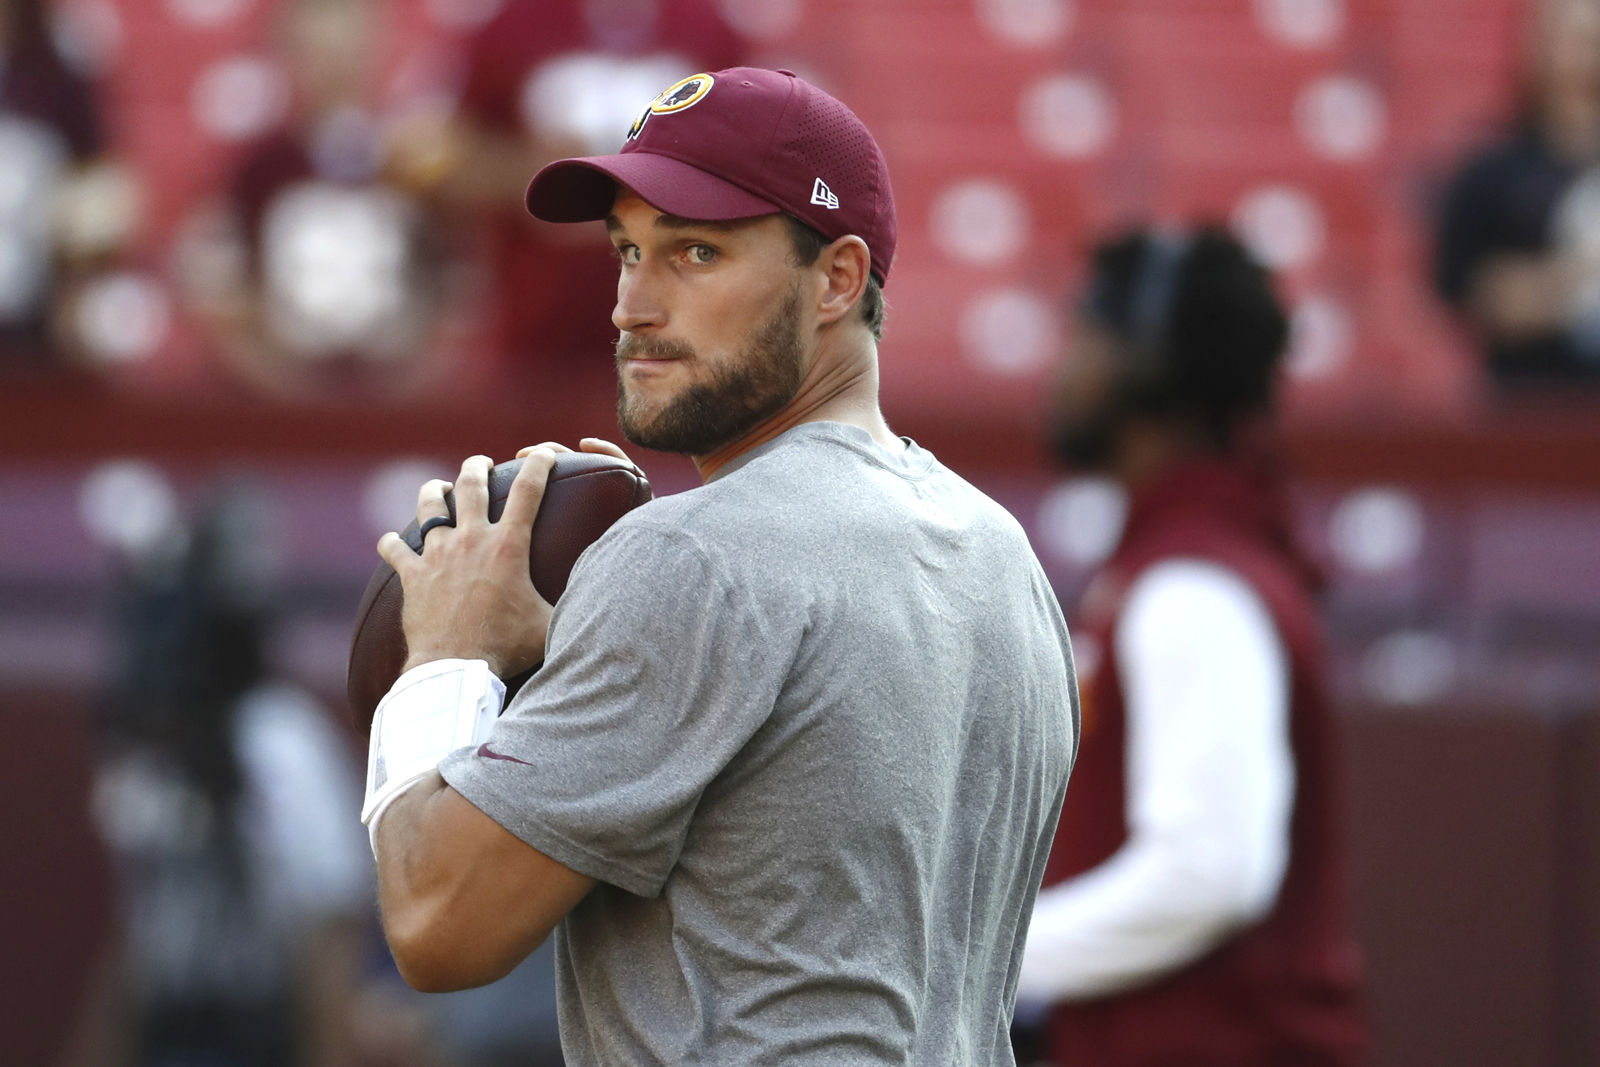 Washington Redskins quarterback Kirk Cousins (8) warms up before an NFL pre-season football game against the Green Bay Packers in Landover, Md., Saturday, Aug. 19, 2017. (AP Photo/Alex Brandon)